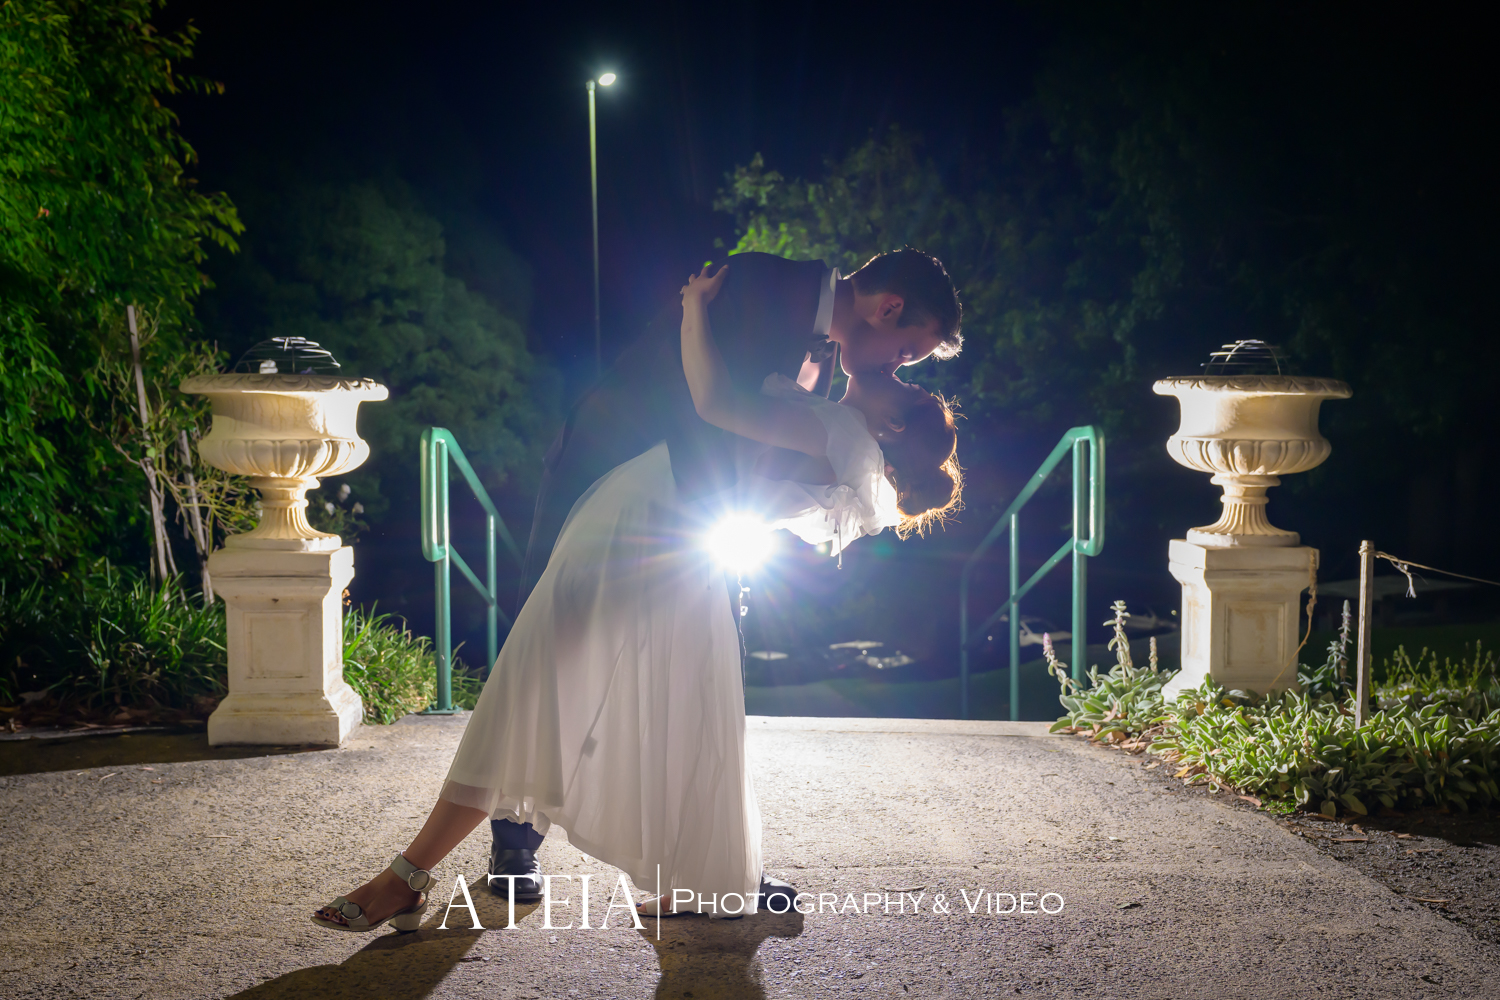 , Shu Chin and Elliot&#8217;s wedding photography at Sky High Mount Dandenong captured by ATEIA Photography &#038; Video